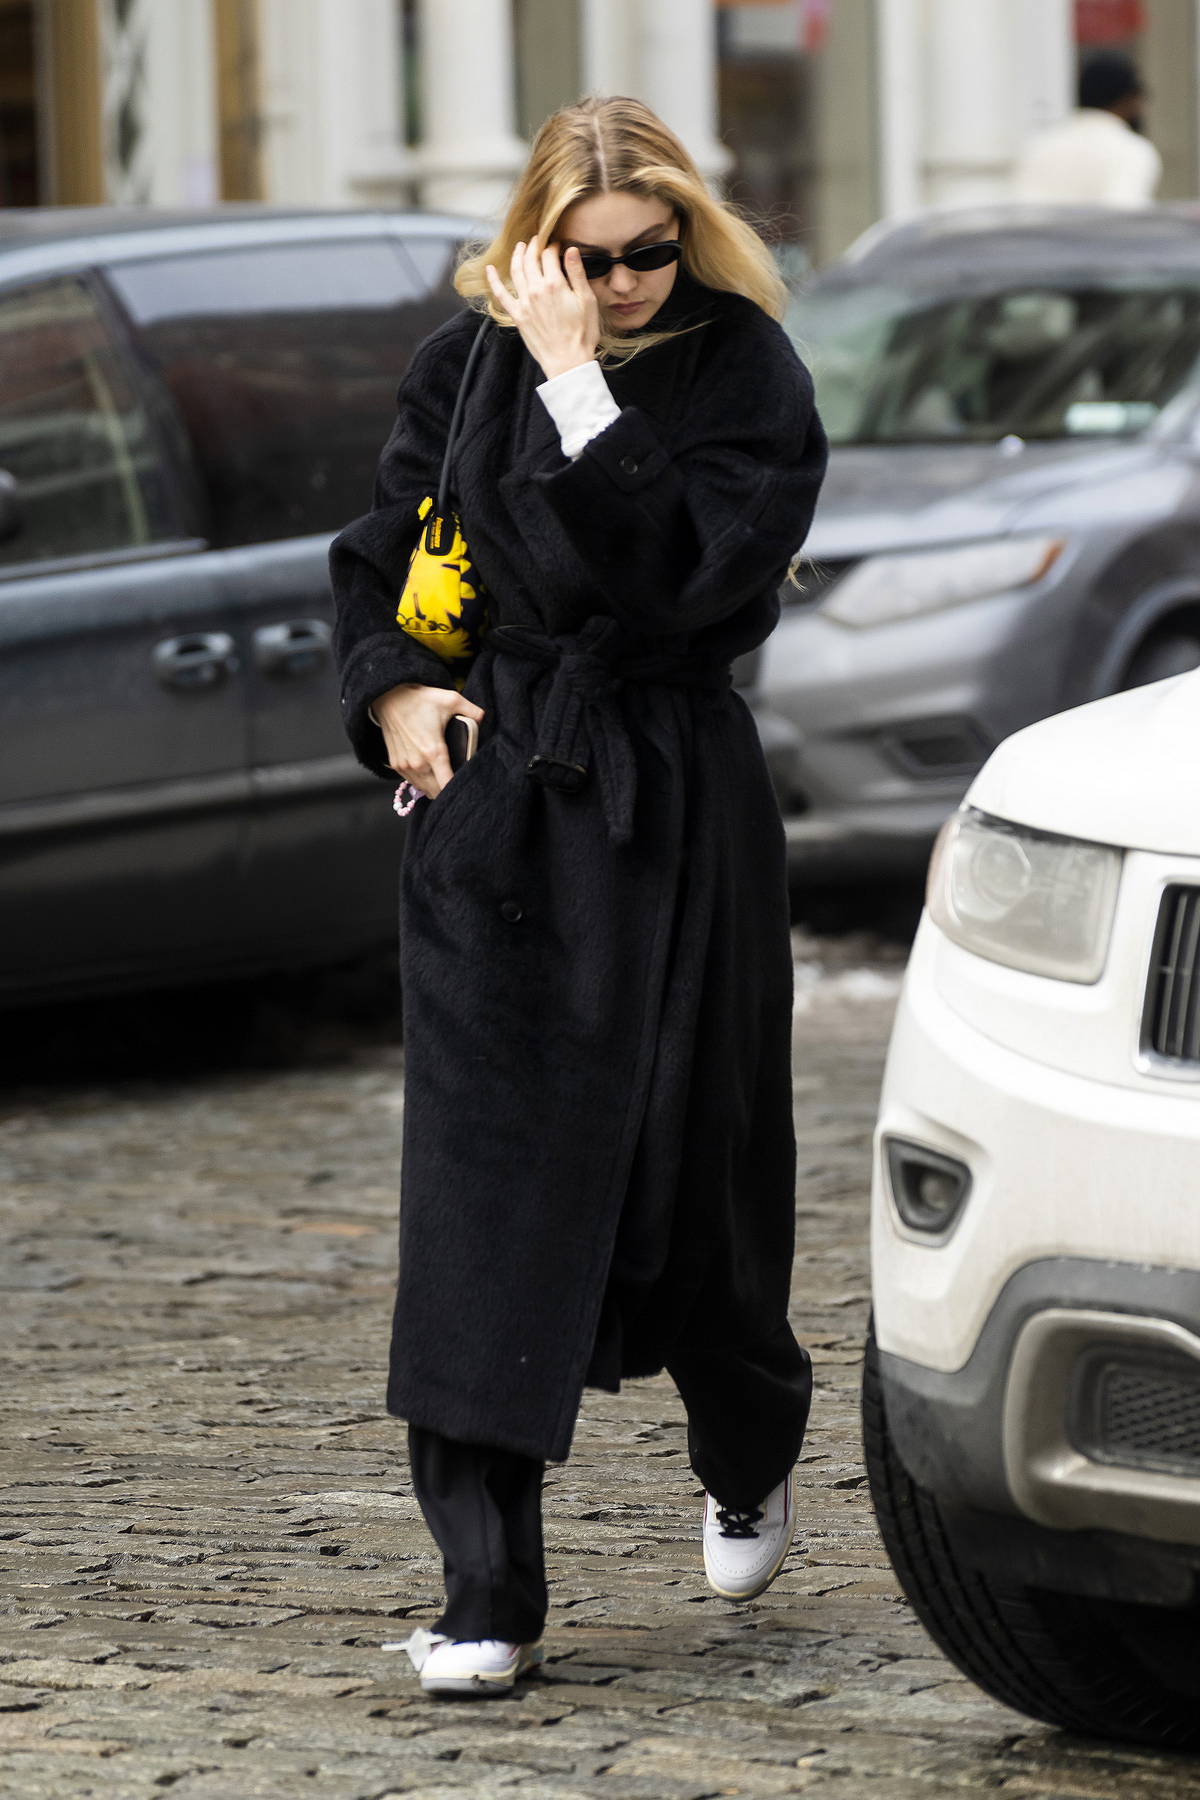 Gigi Hadid bundles up in a black winter coat as she steps out in New York